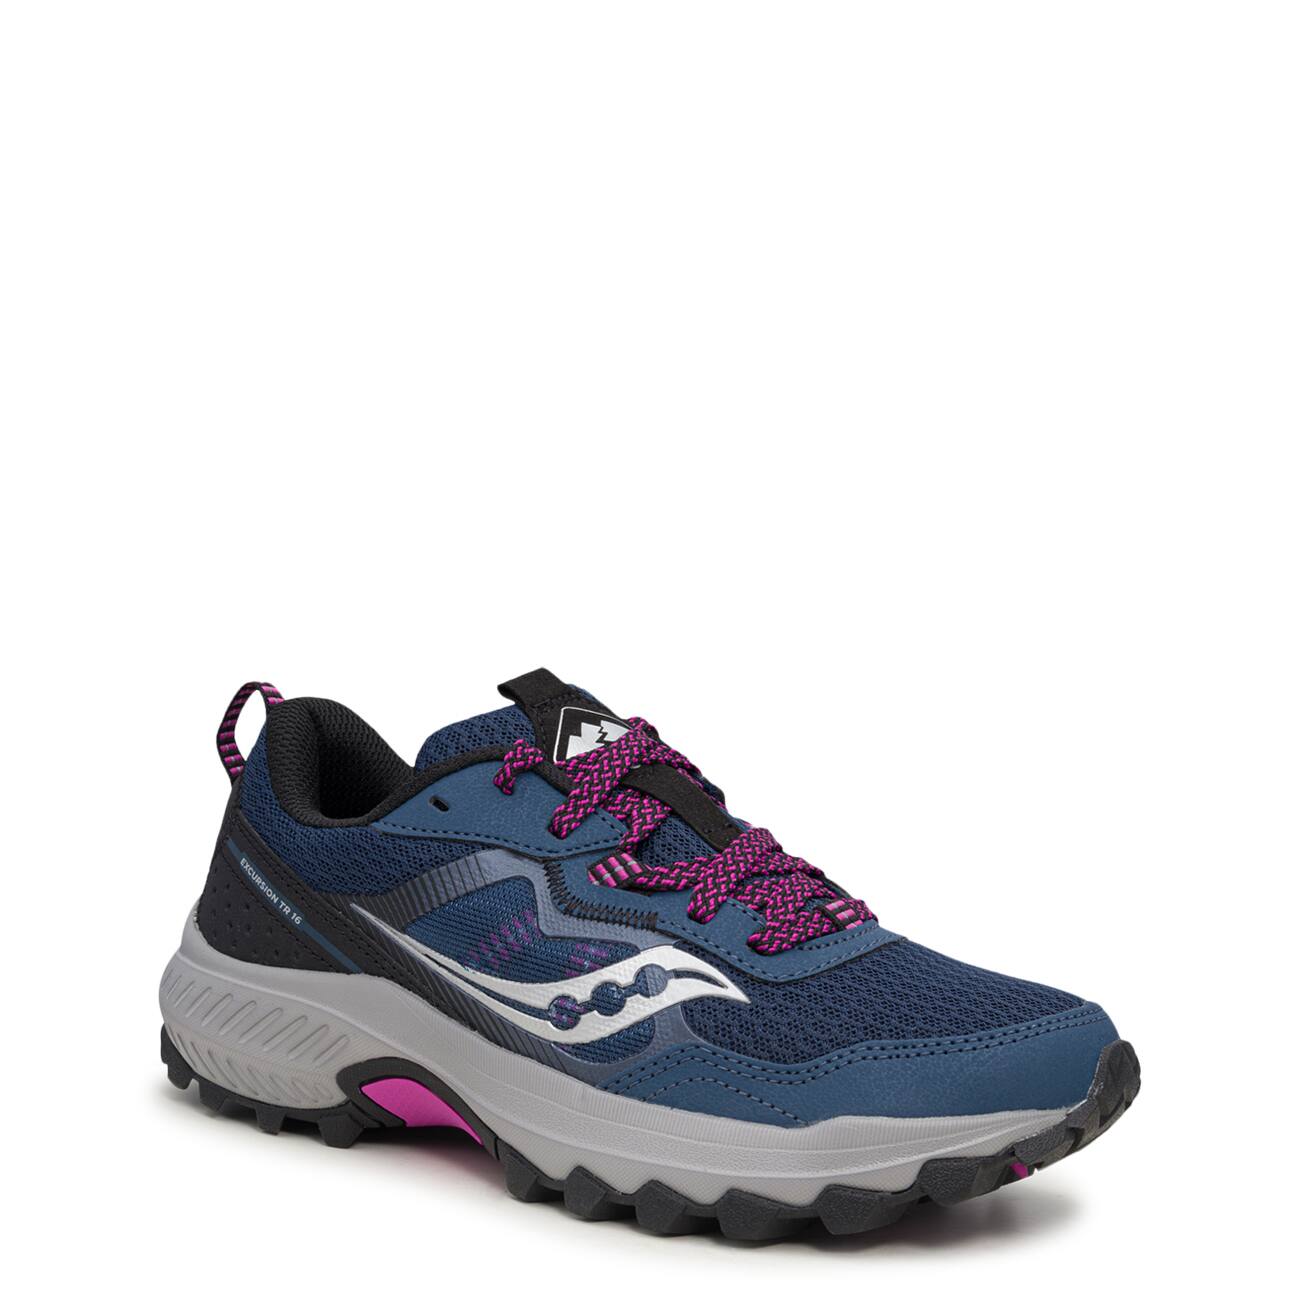 Saucony Women's Excursion TR16 Trail Running Shoe | The Shoe Company